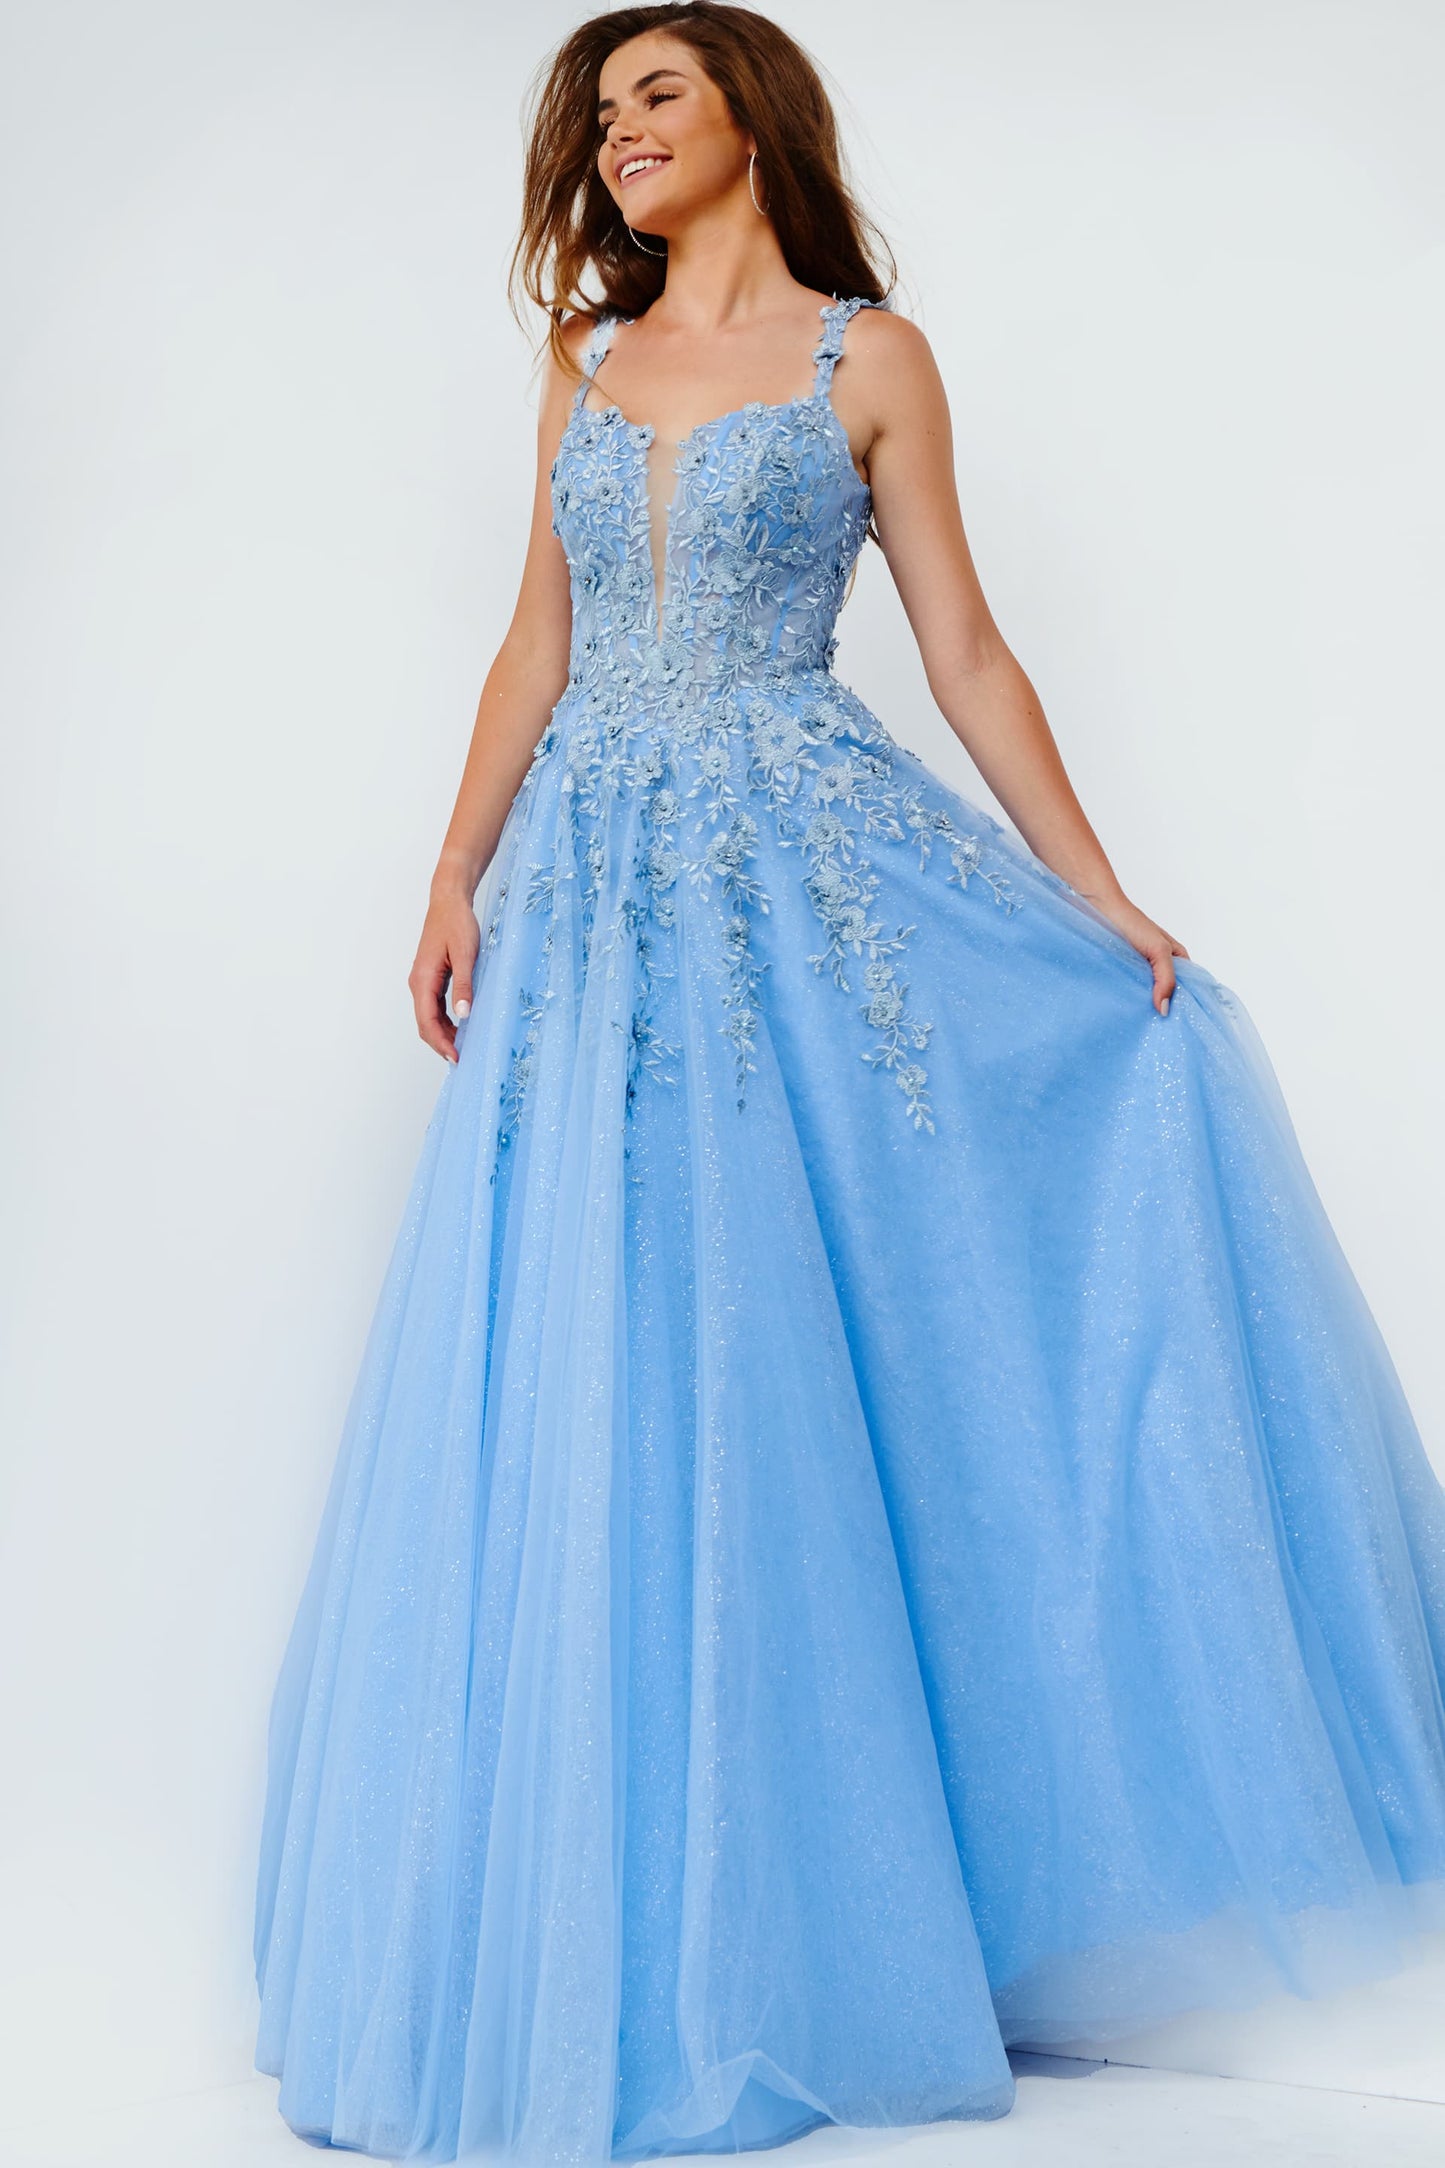 Lace Applique Prom Dresses with Slit Removable Long Sleeve Formal Gown  21963 - Light Blue / US2